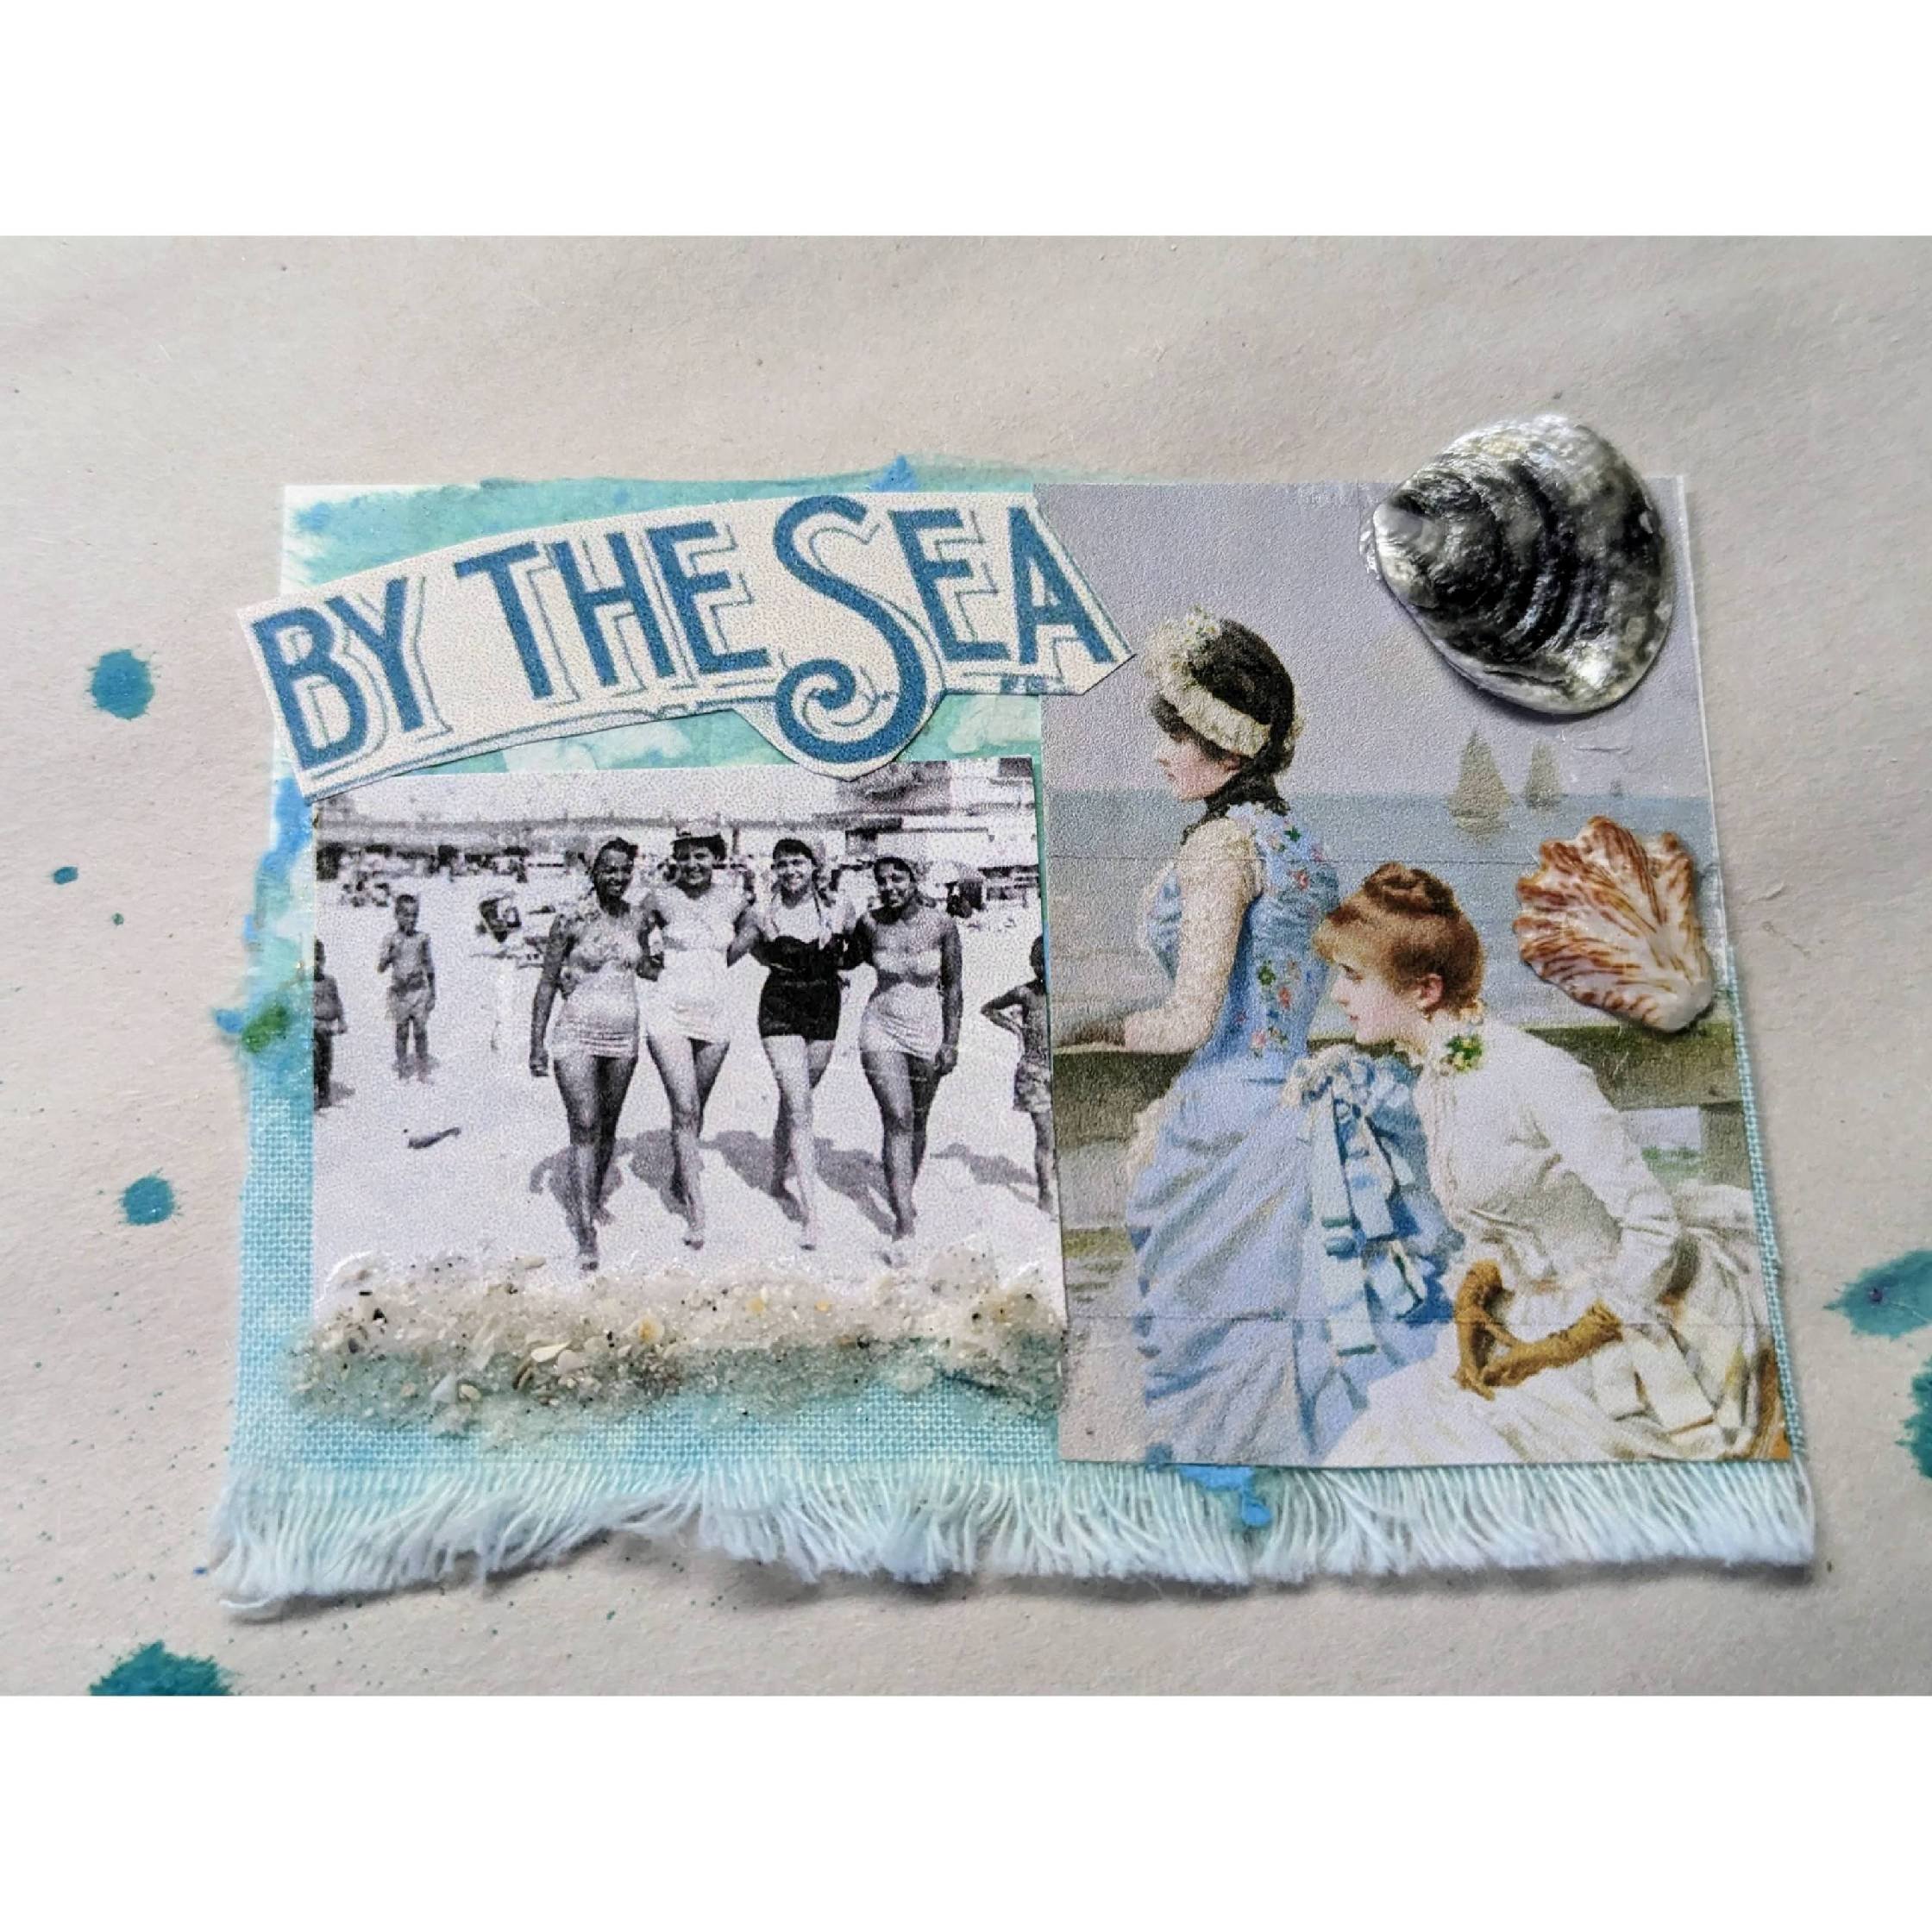 For a By the Sea ATC swap